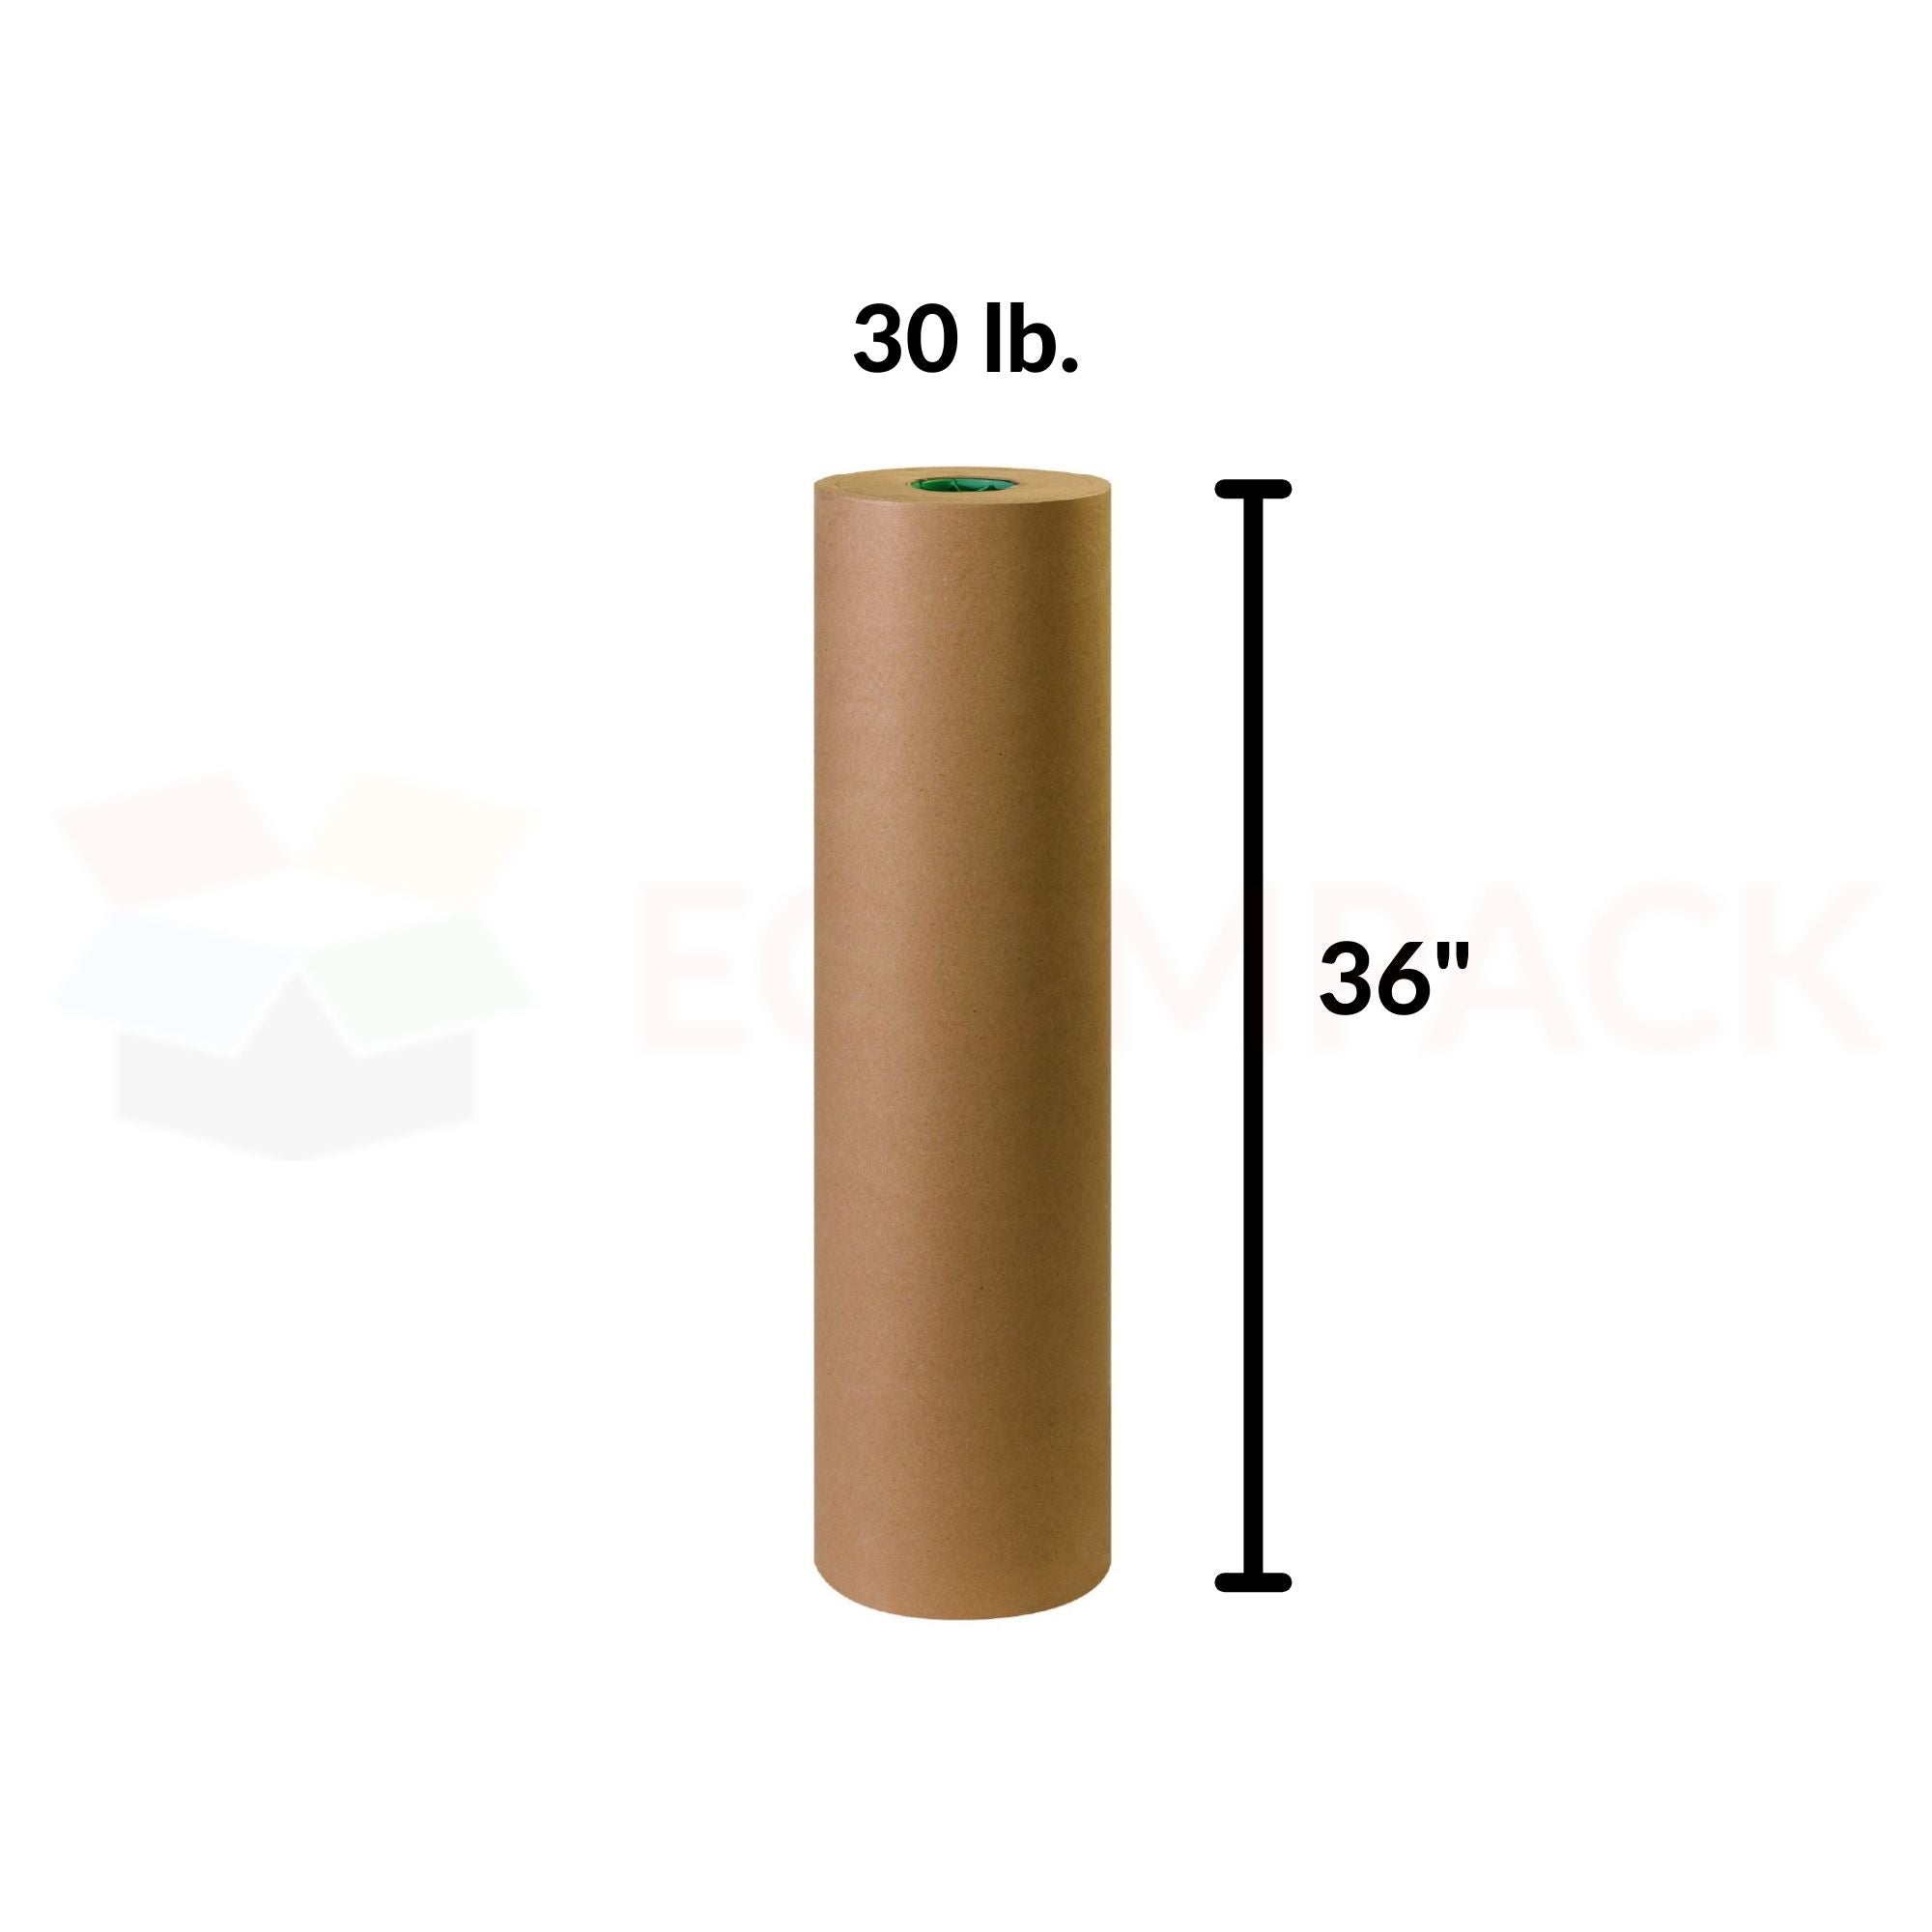 Kraft Paper Roll for Gift Wrapping, Moving, Packing, Plain Brown